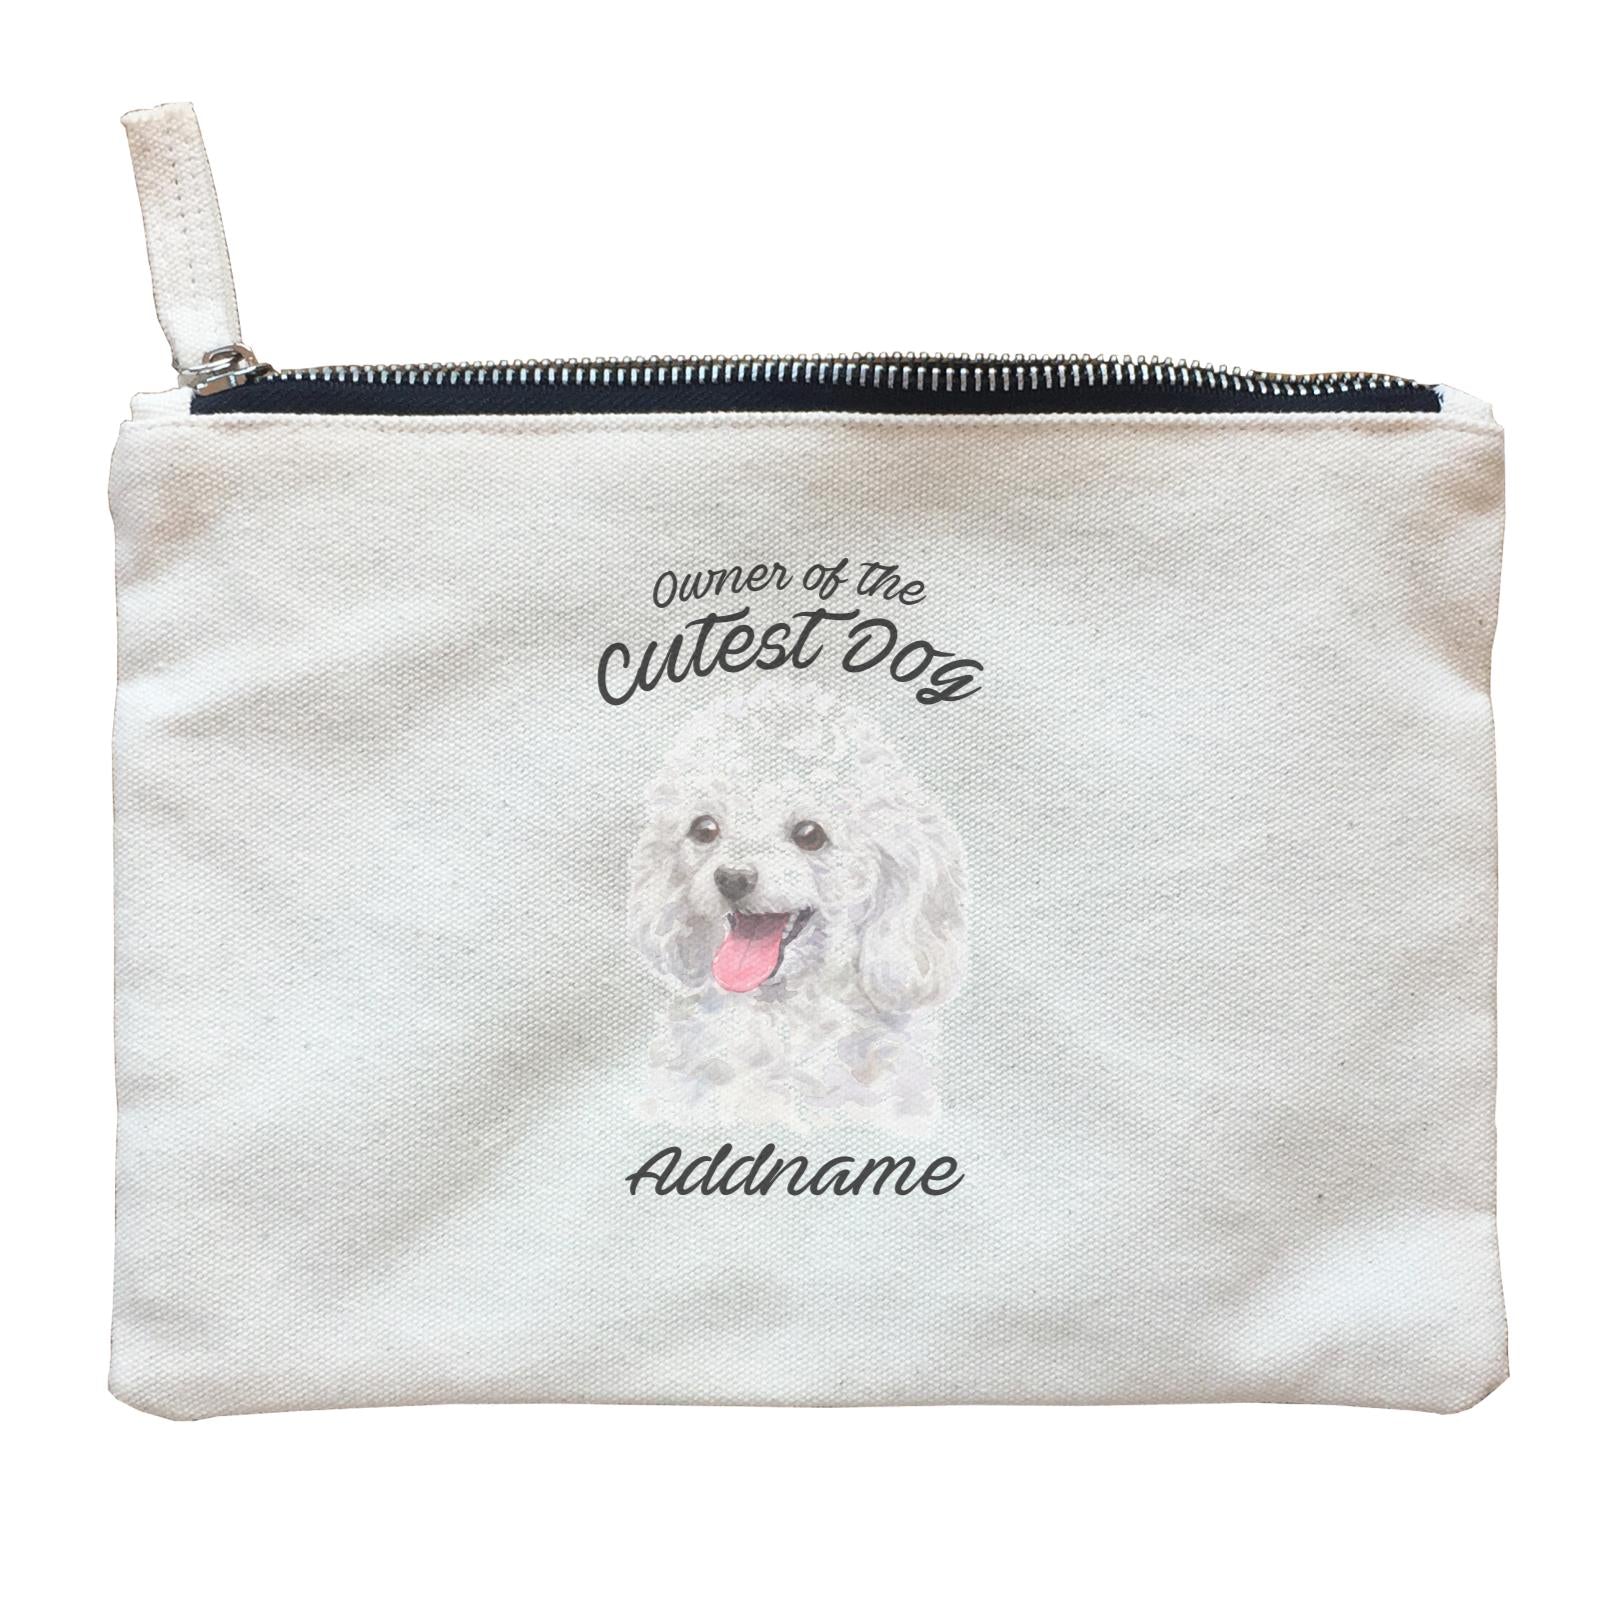 Watercolor Dog Owner Of The Cutest Dog Poodle White Addname Zipper Pouch